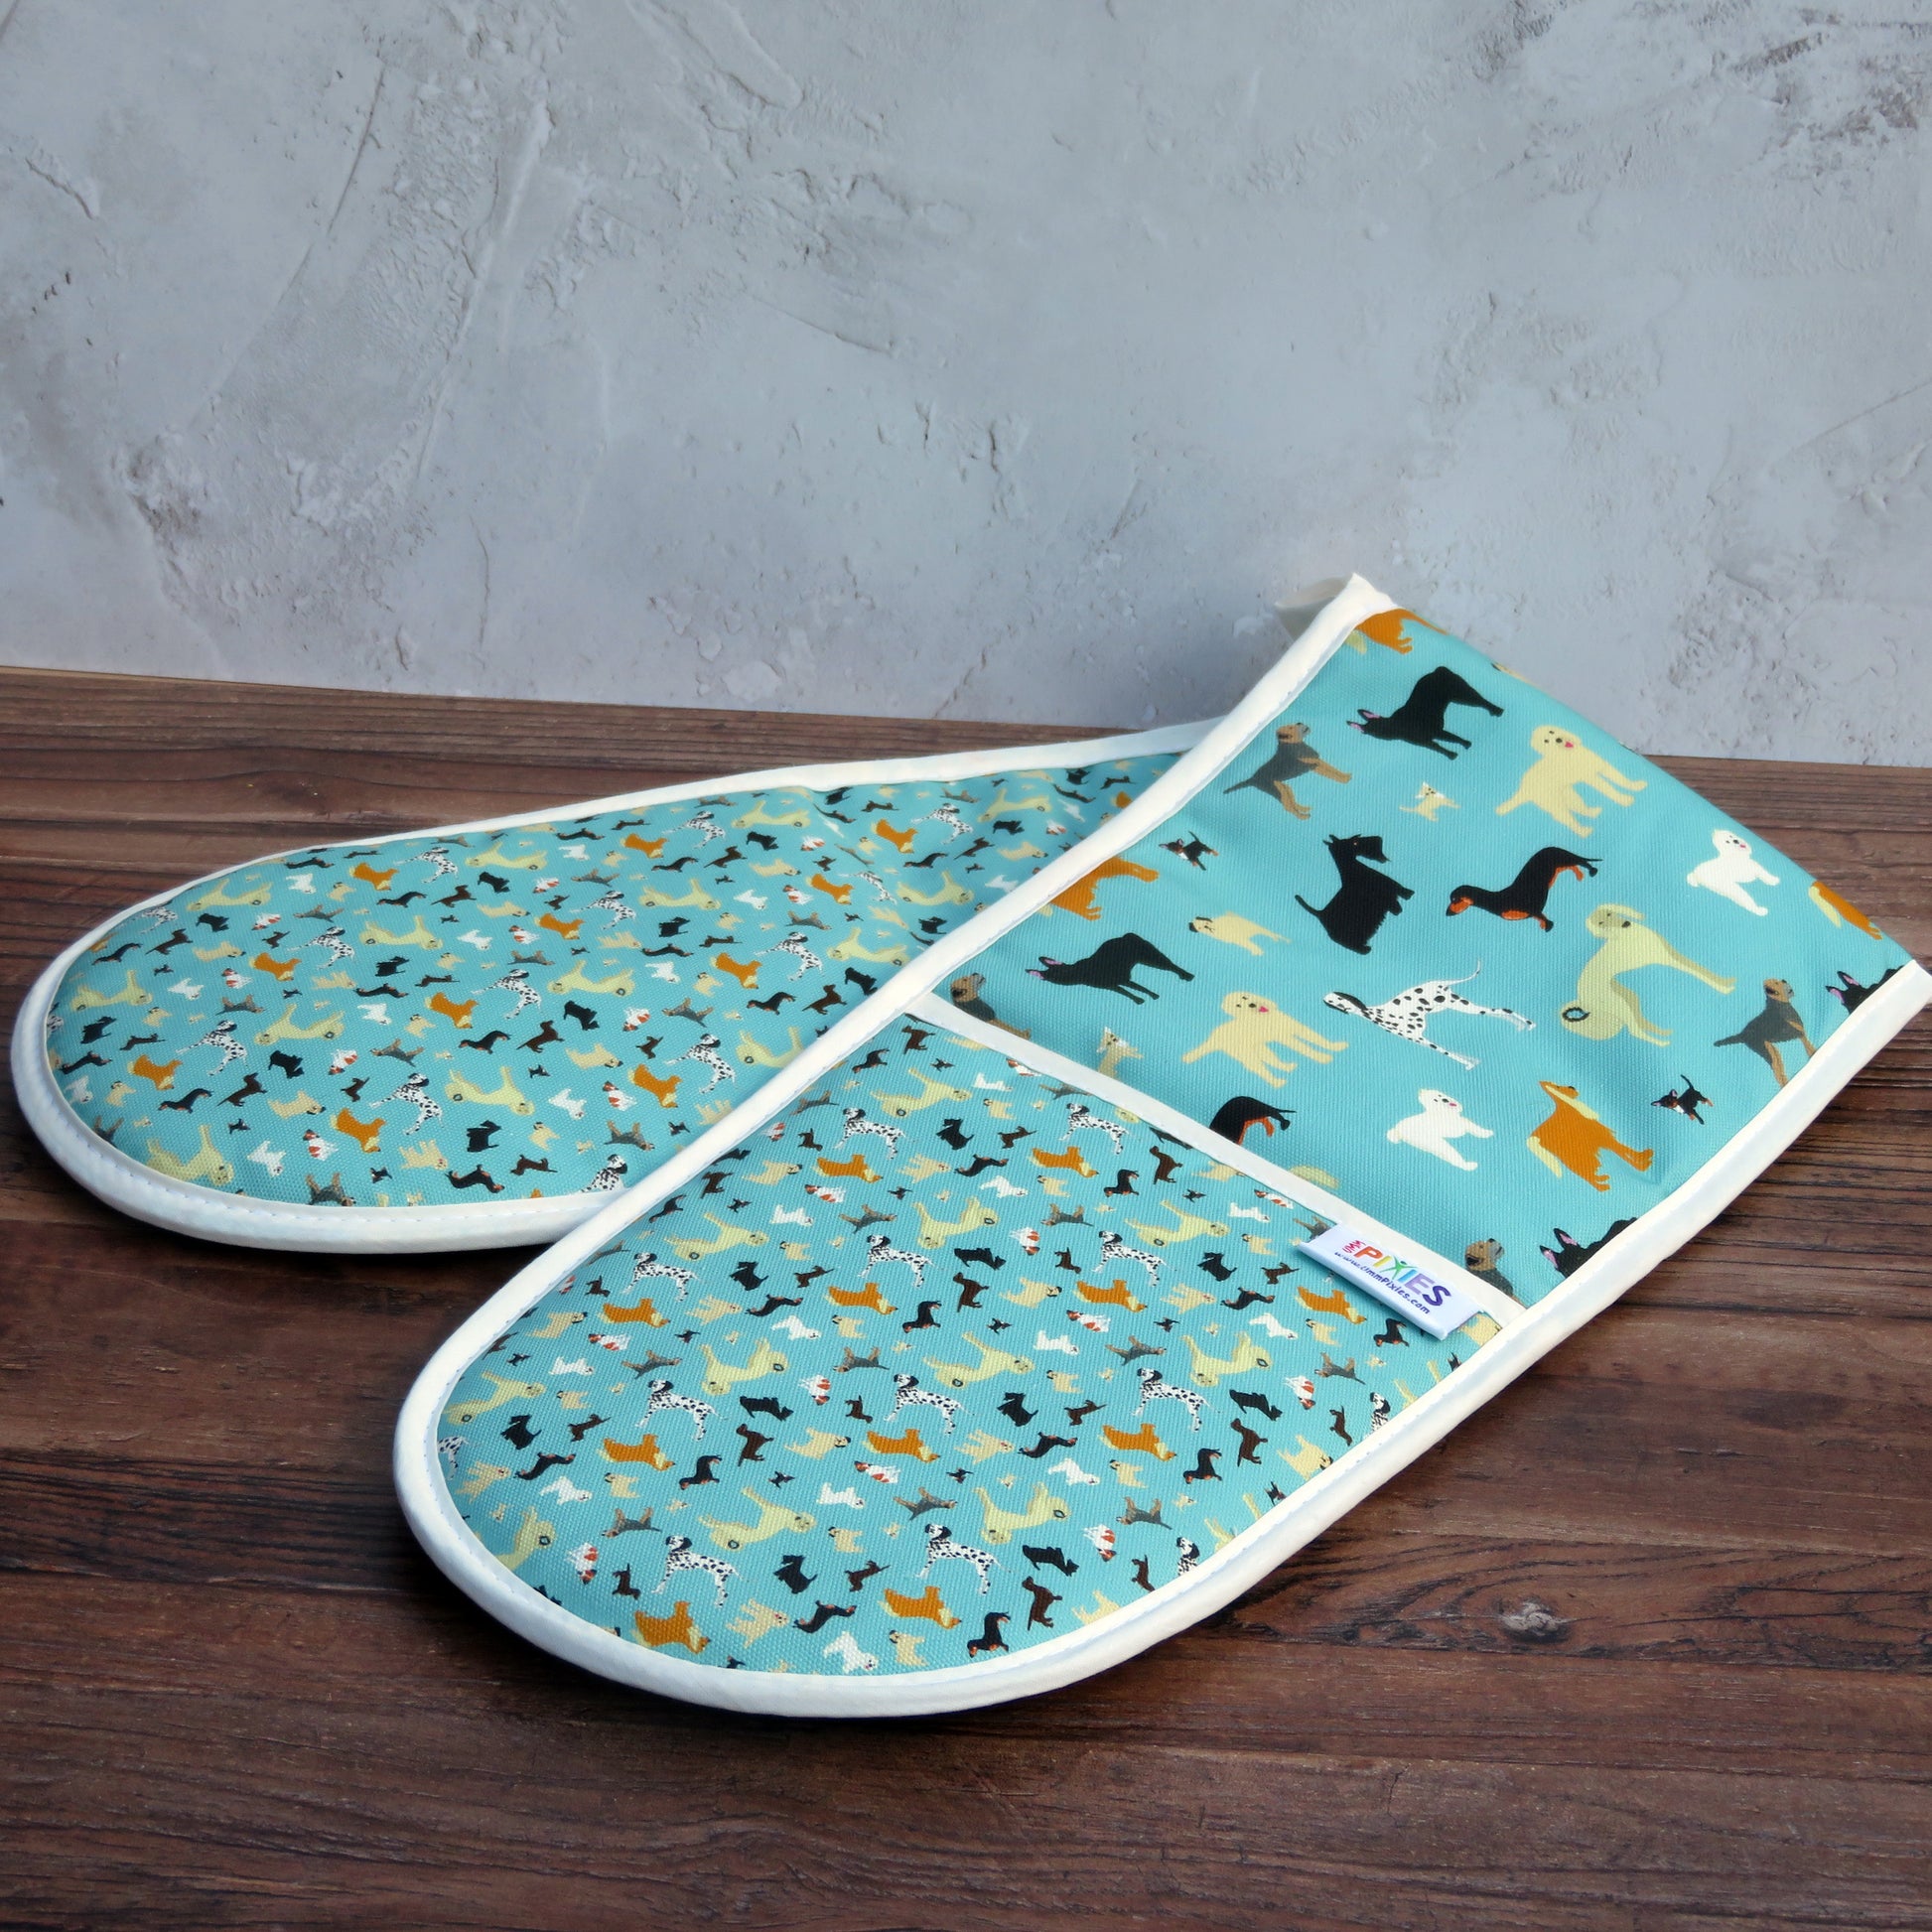 Blue Dogs Oven Gloves in Organic Cotton , designed and madden Britain